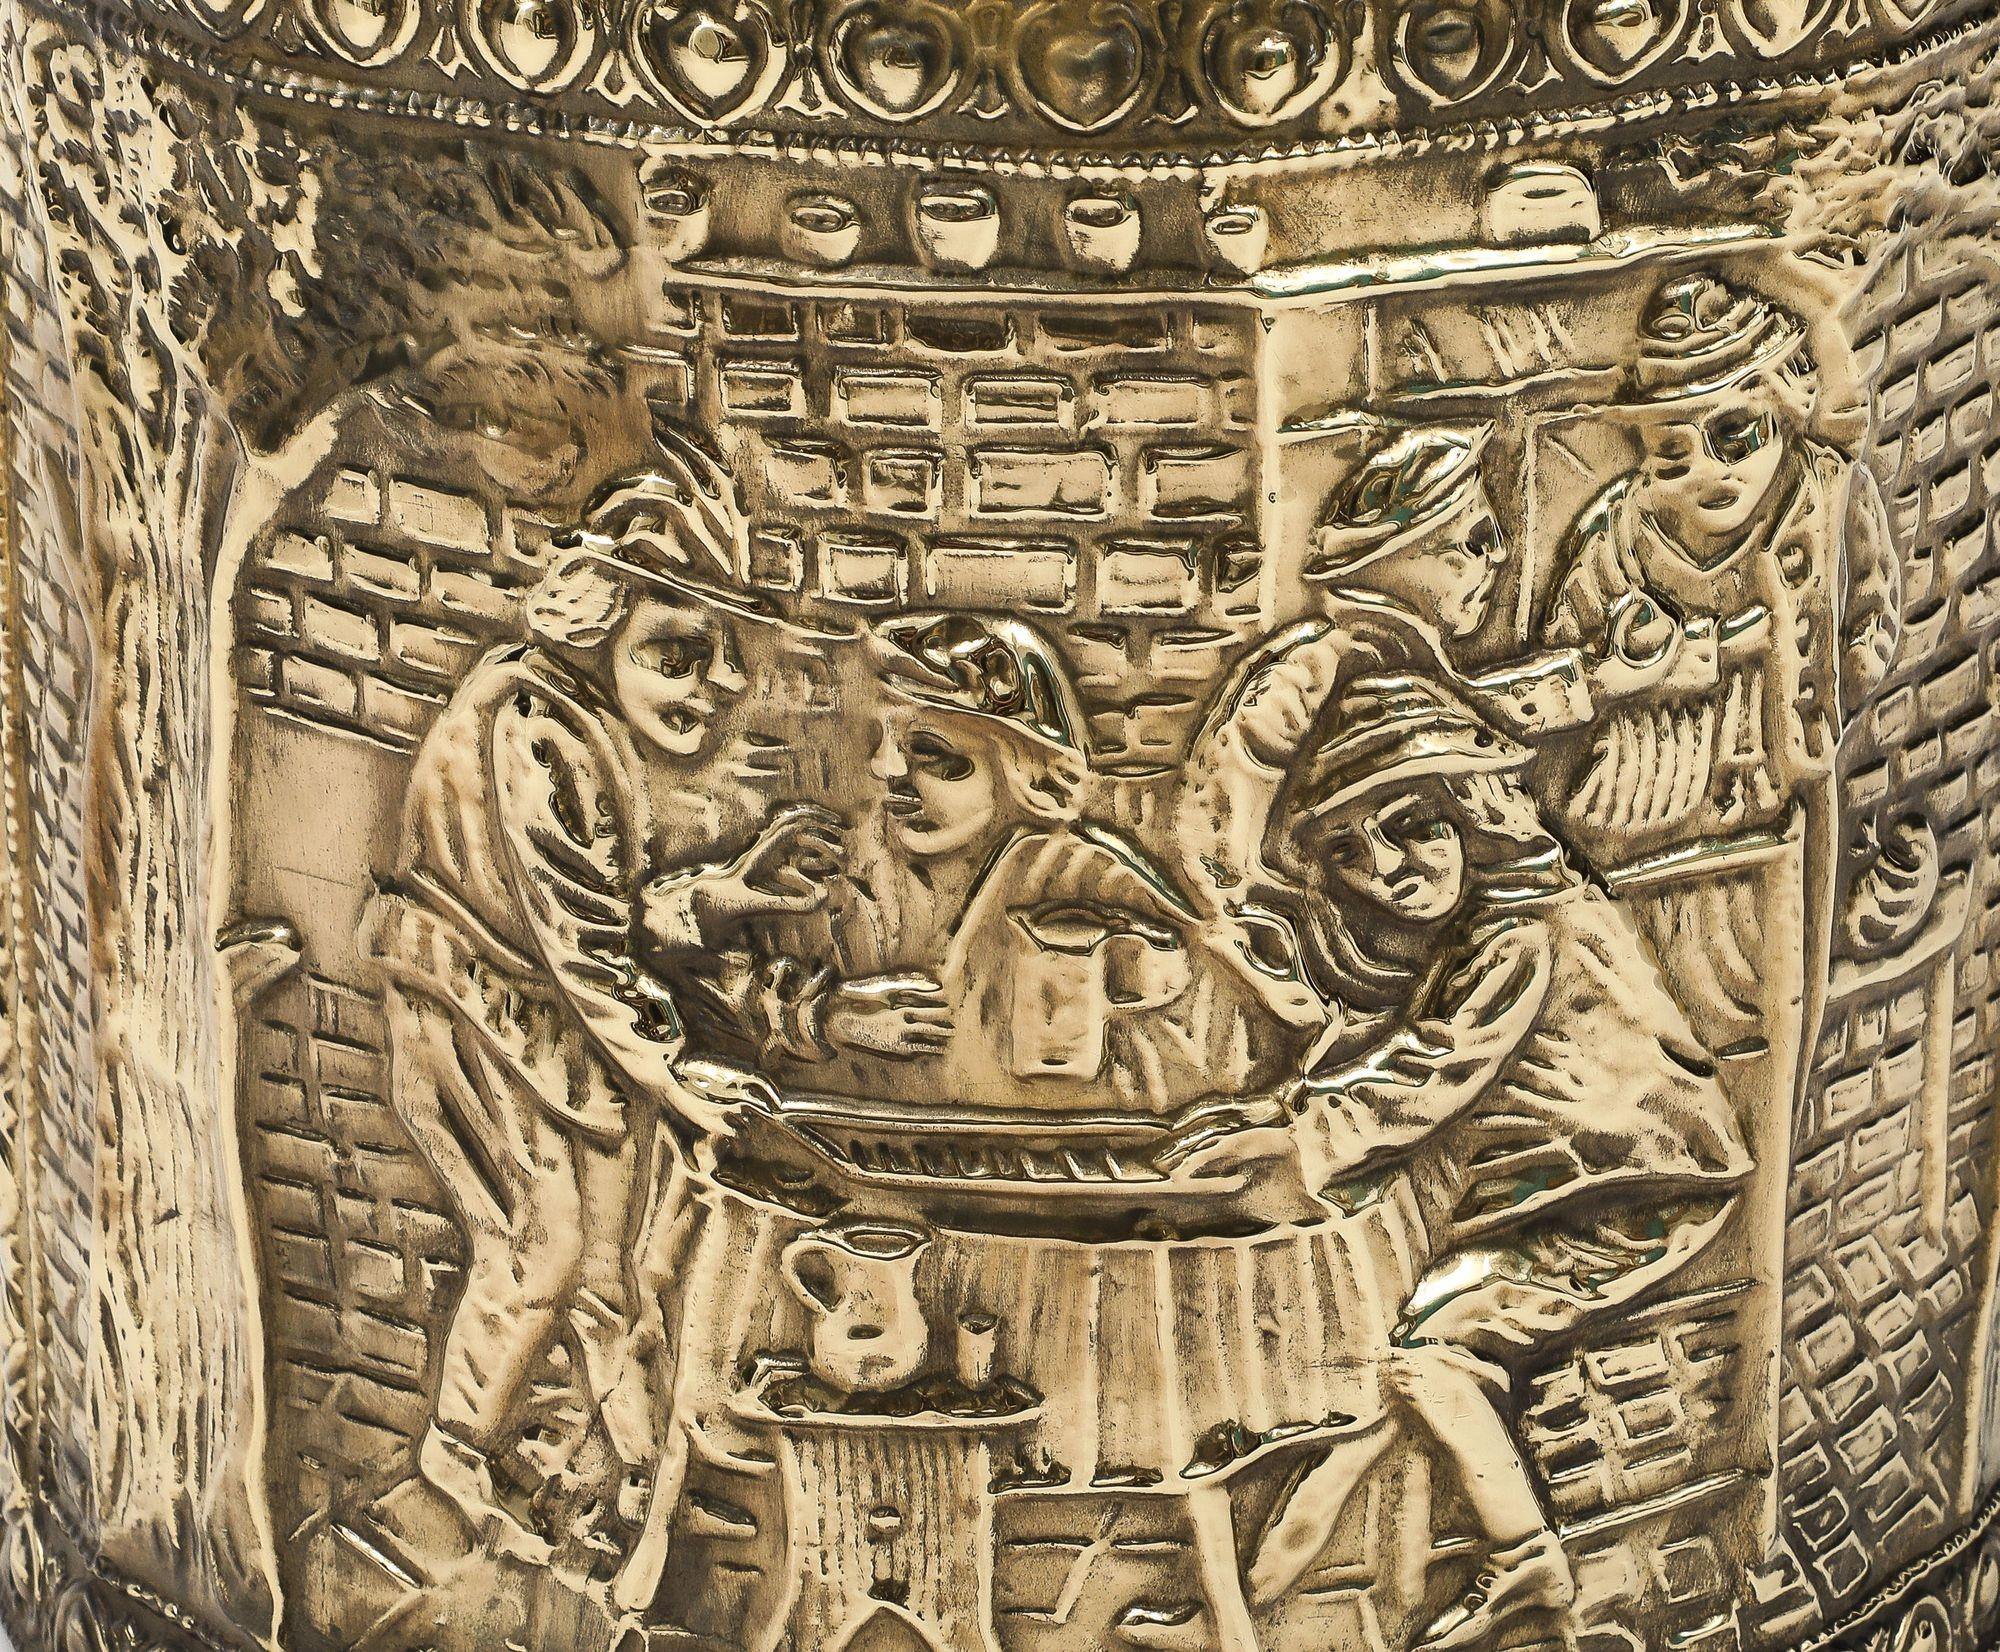 Late 19th Century reposse brass coal or kindling bucket, the front and back embossed with rustic tavern scenes.